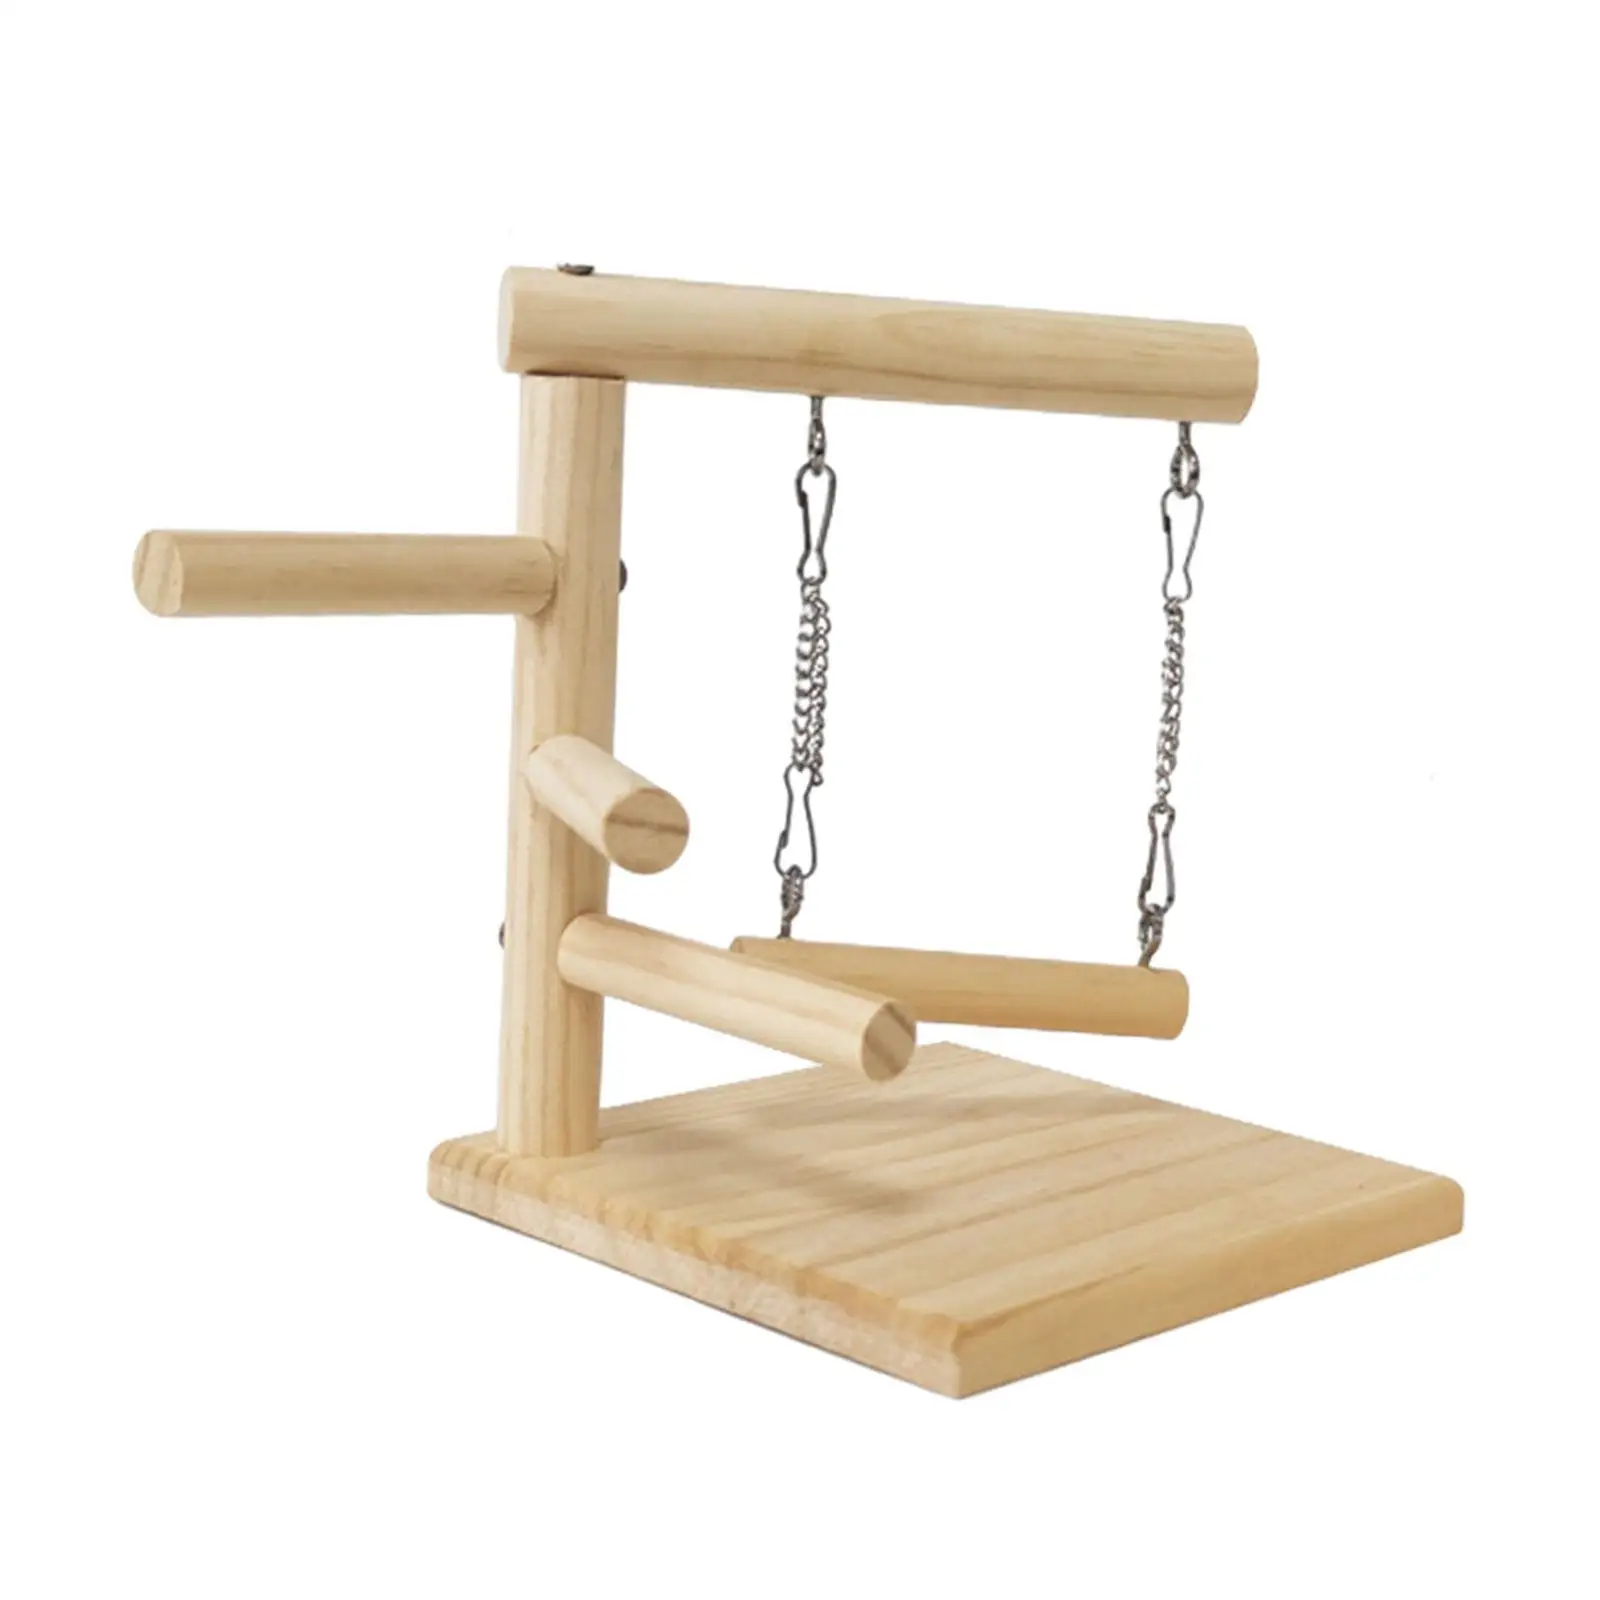 Bird Perch Stand Tabletop Exercise Gym Playground Bird Perches Standing Sticks for Canaries Parrots Cockatiels Parakeets